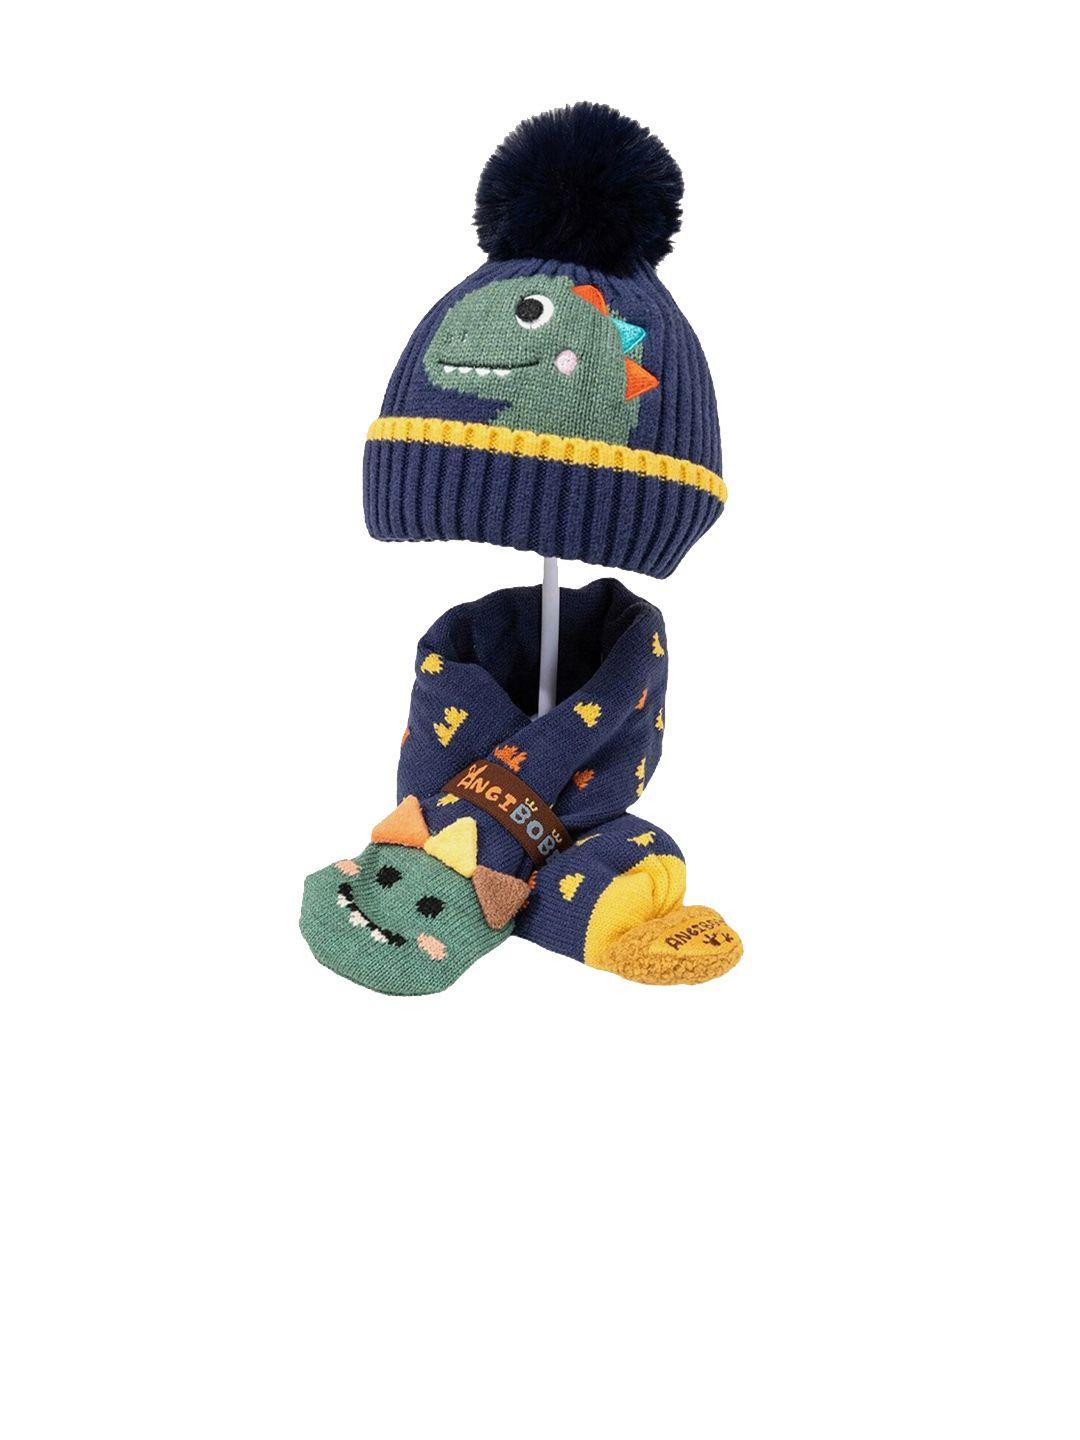 little surprise box llp kids knitted winter patterned wool mufflers with cap